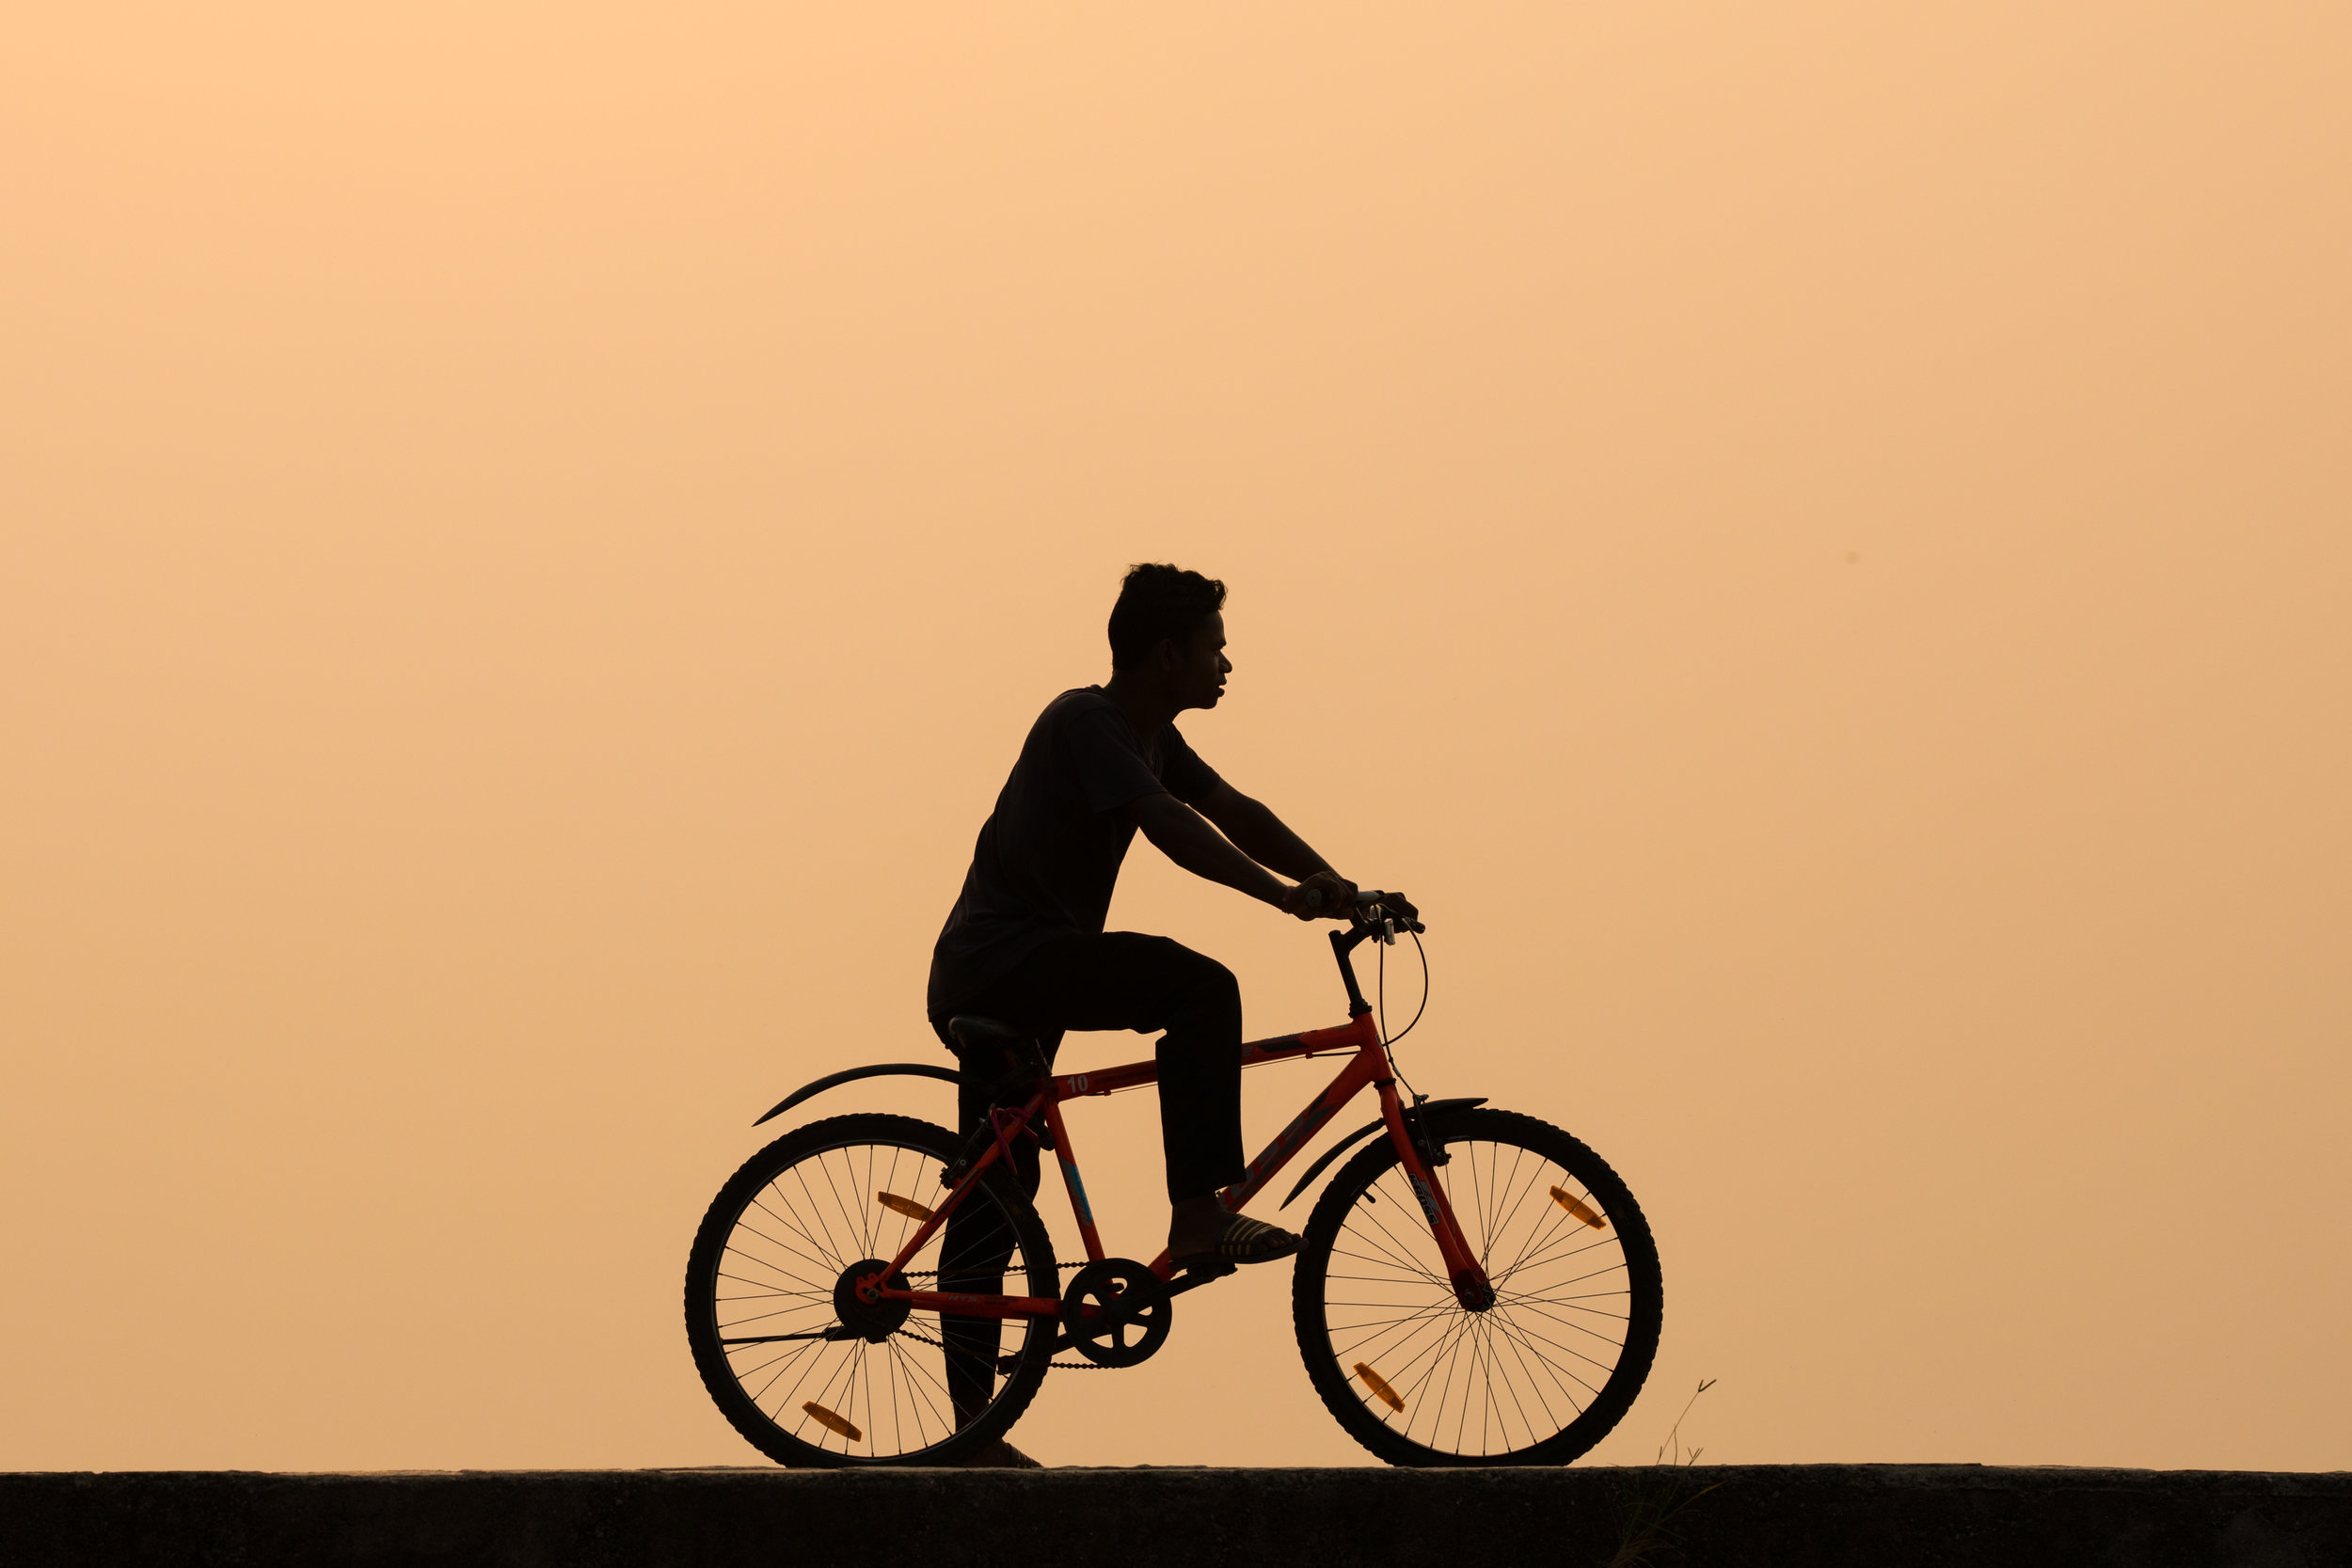 Silhouetted cycle at sunset, Kerala, India.